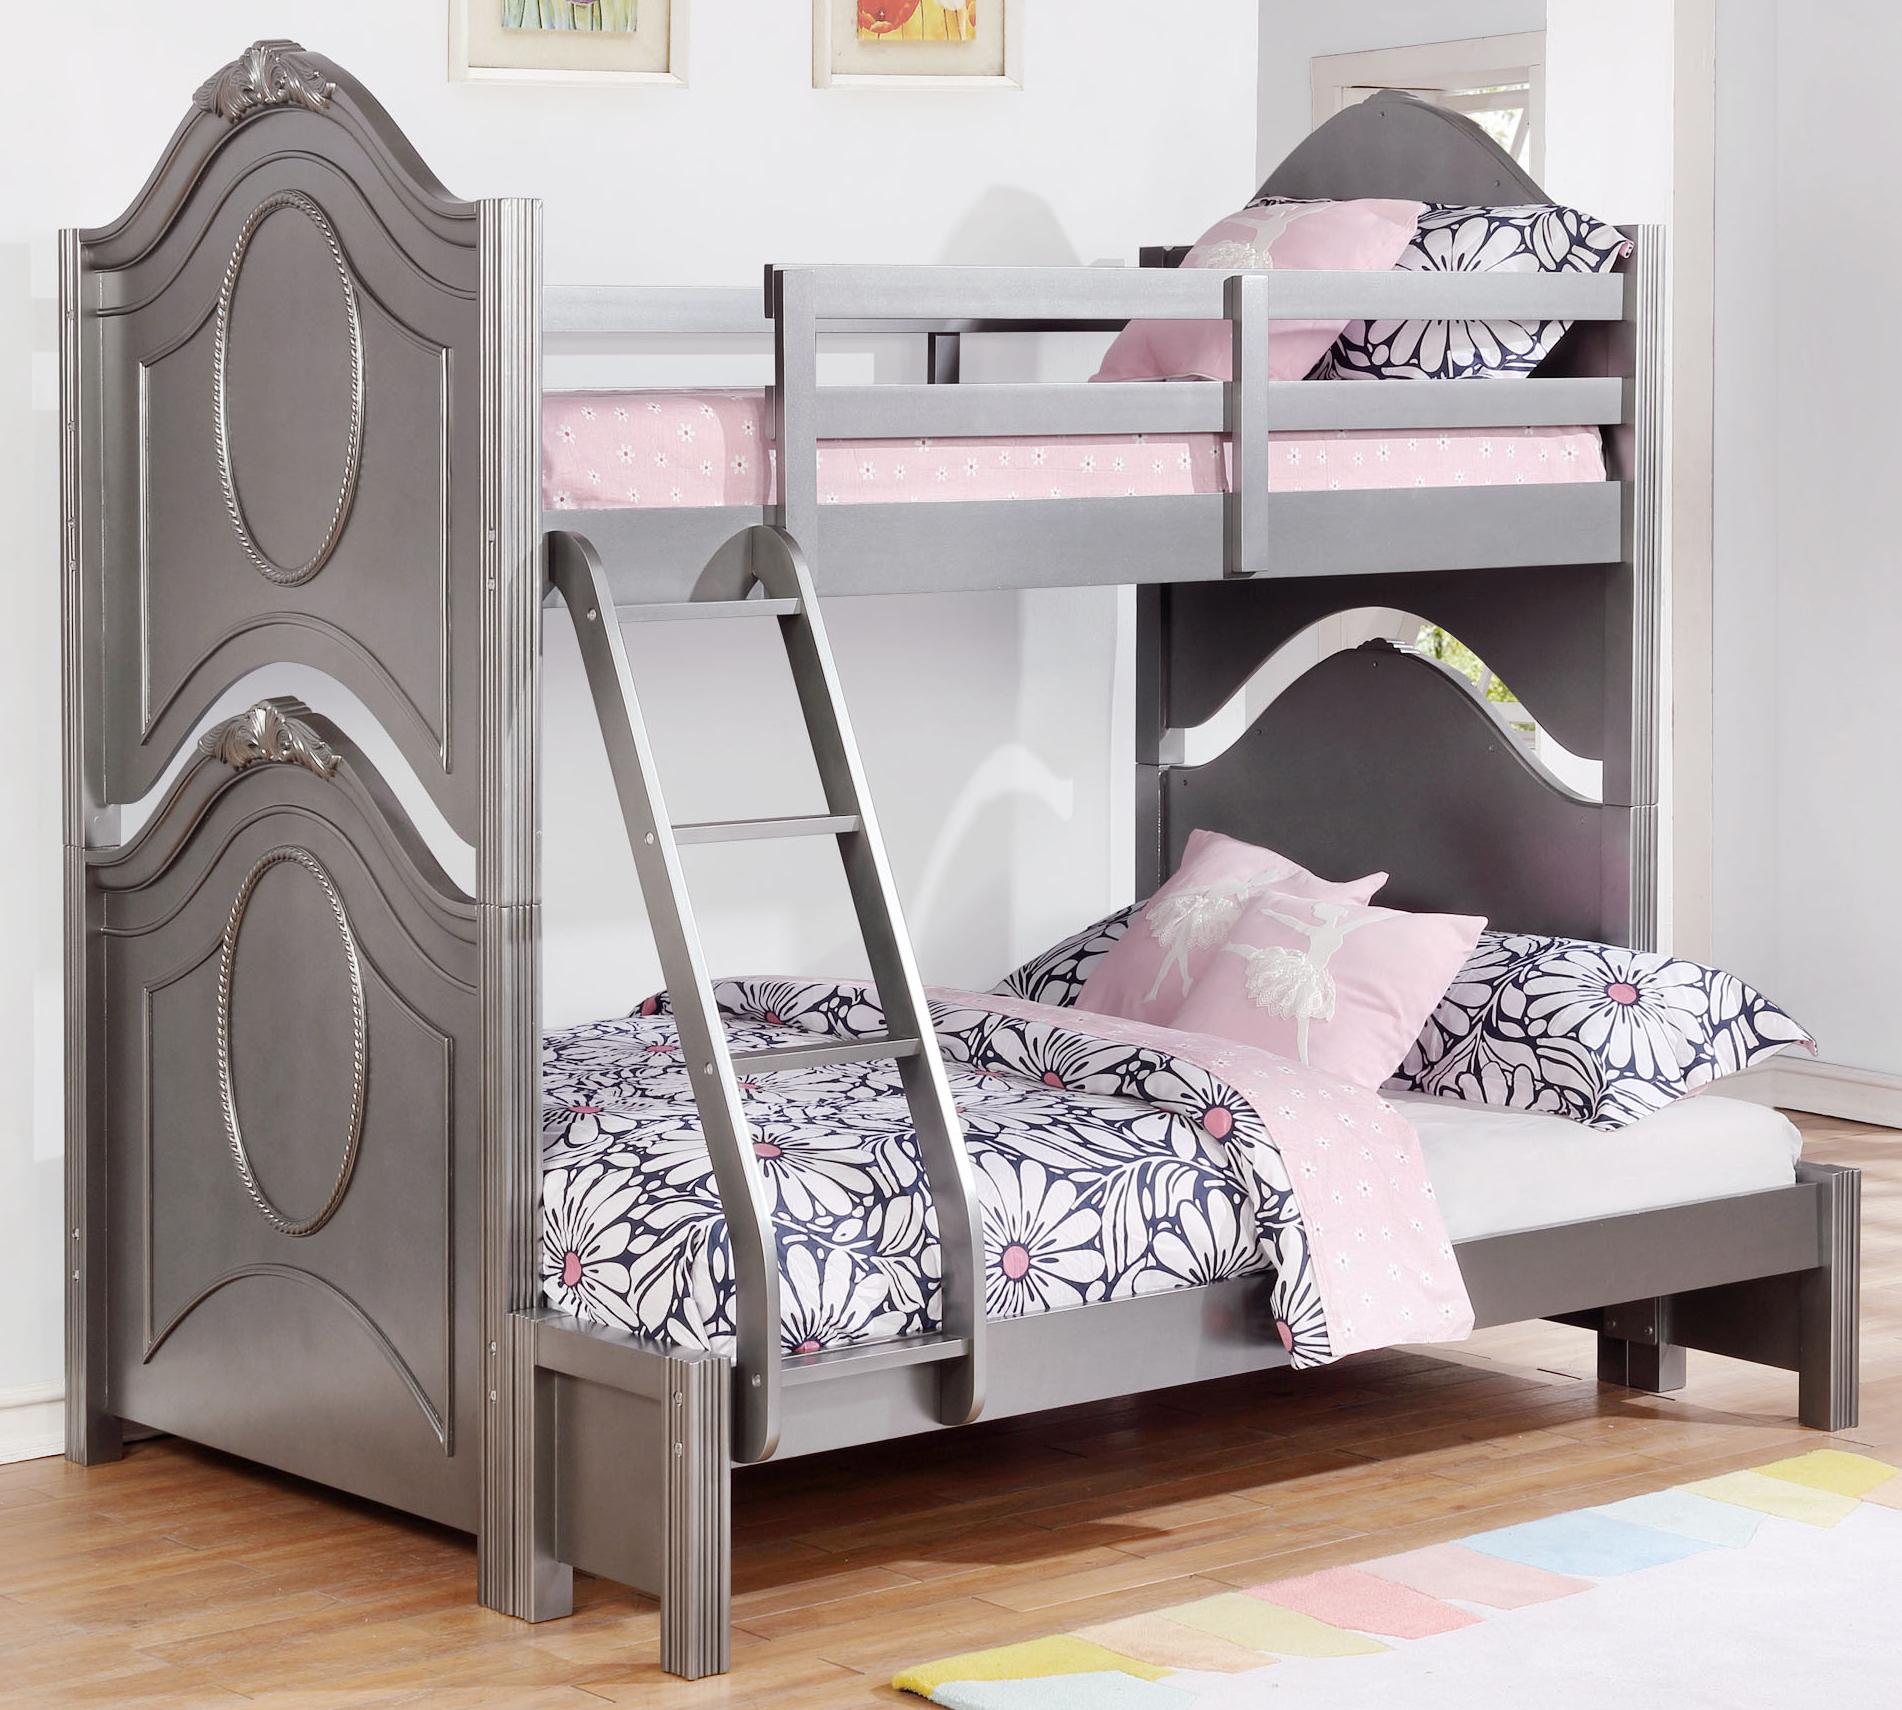 Transitional Bunk Bed Valentine 461132 in Gray 